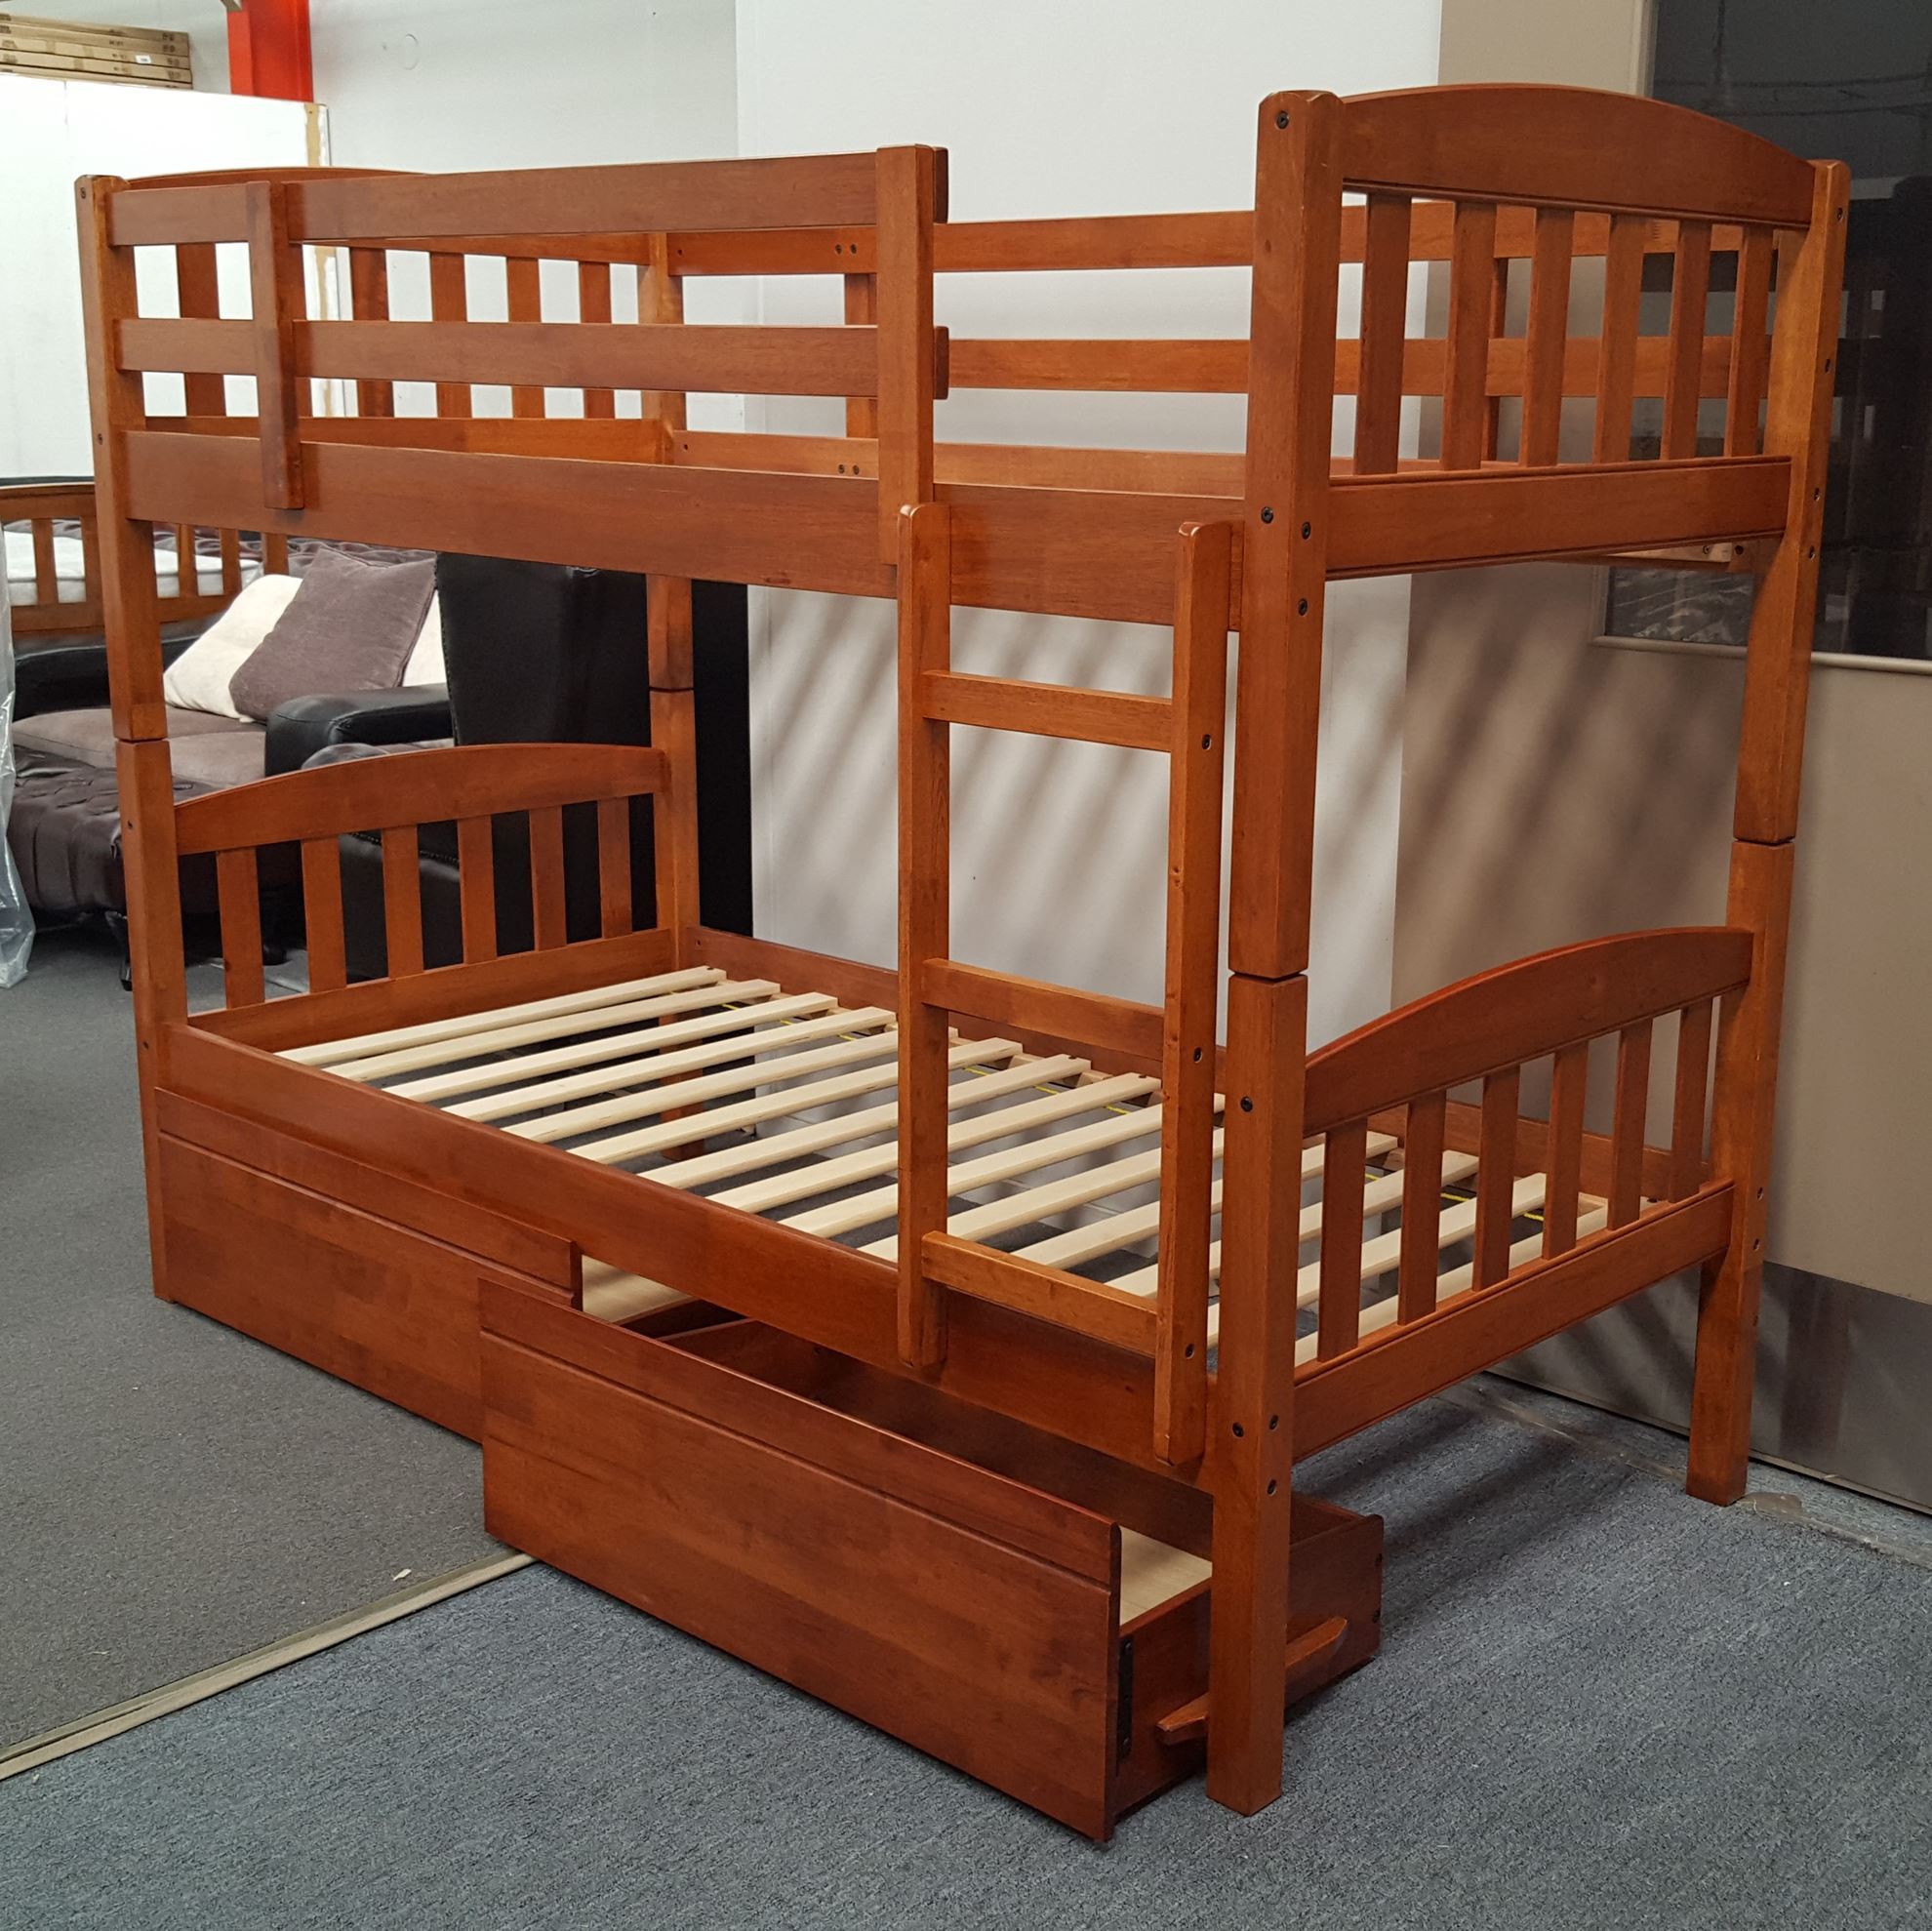 Furniture Place: Miki King Single Bunk Bed with Mattresses ...